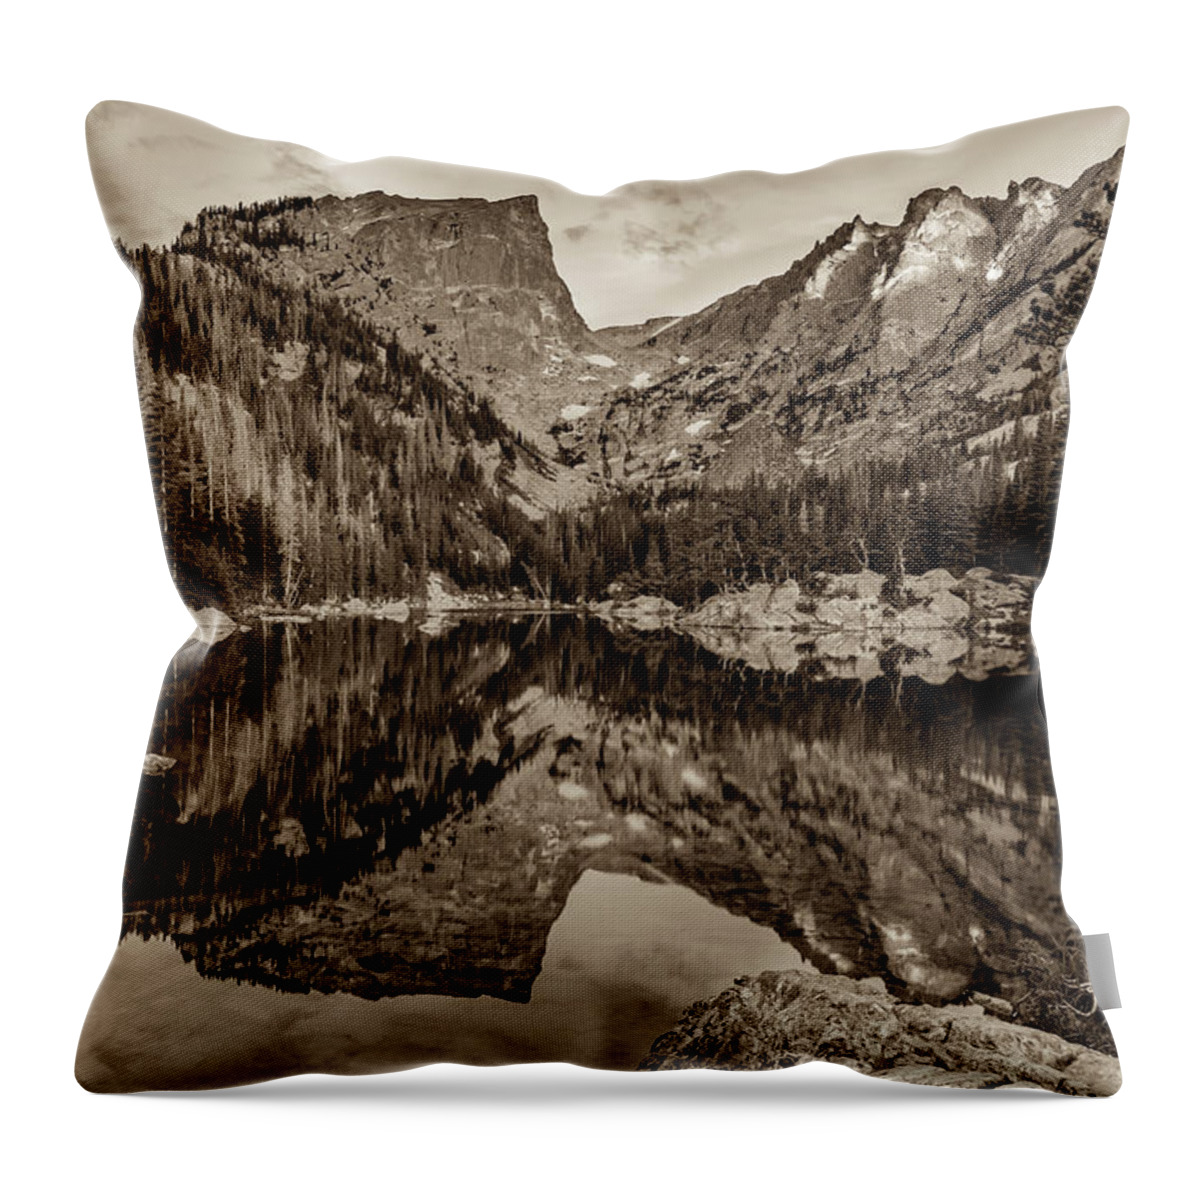 America Throw Pillow featuring the photograph Dream Lake Reflections And Rocky Mountain National Park Landscape - Sepia by Gregory Ballos